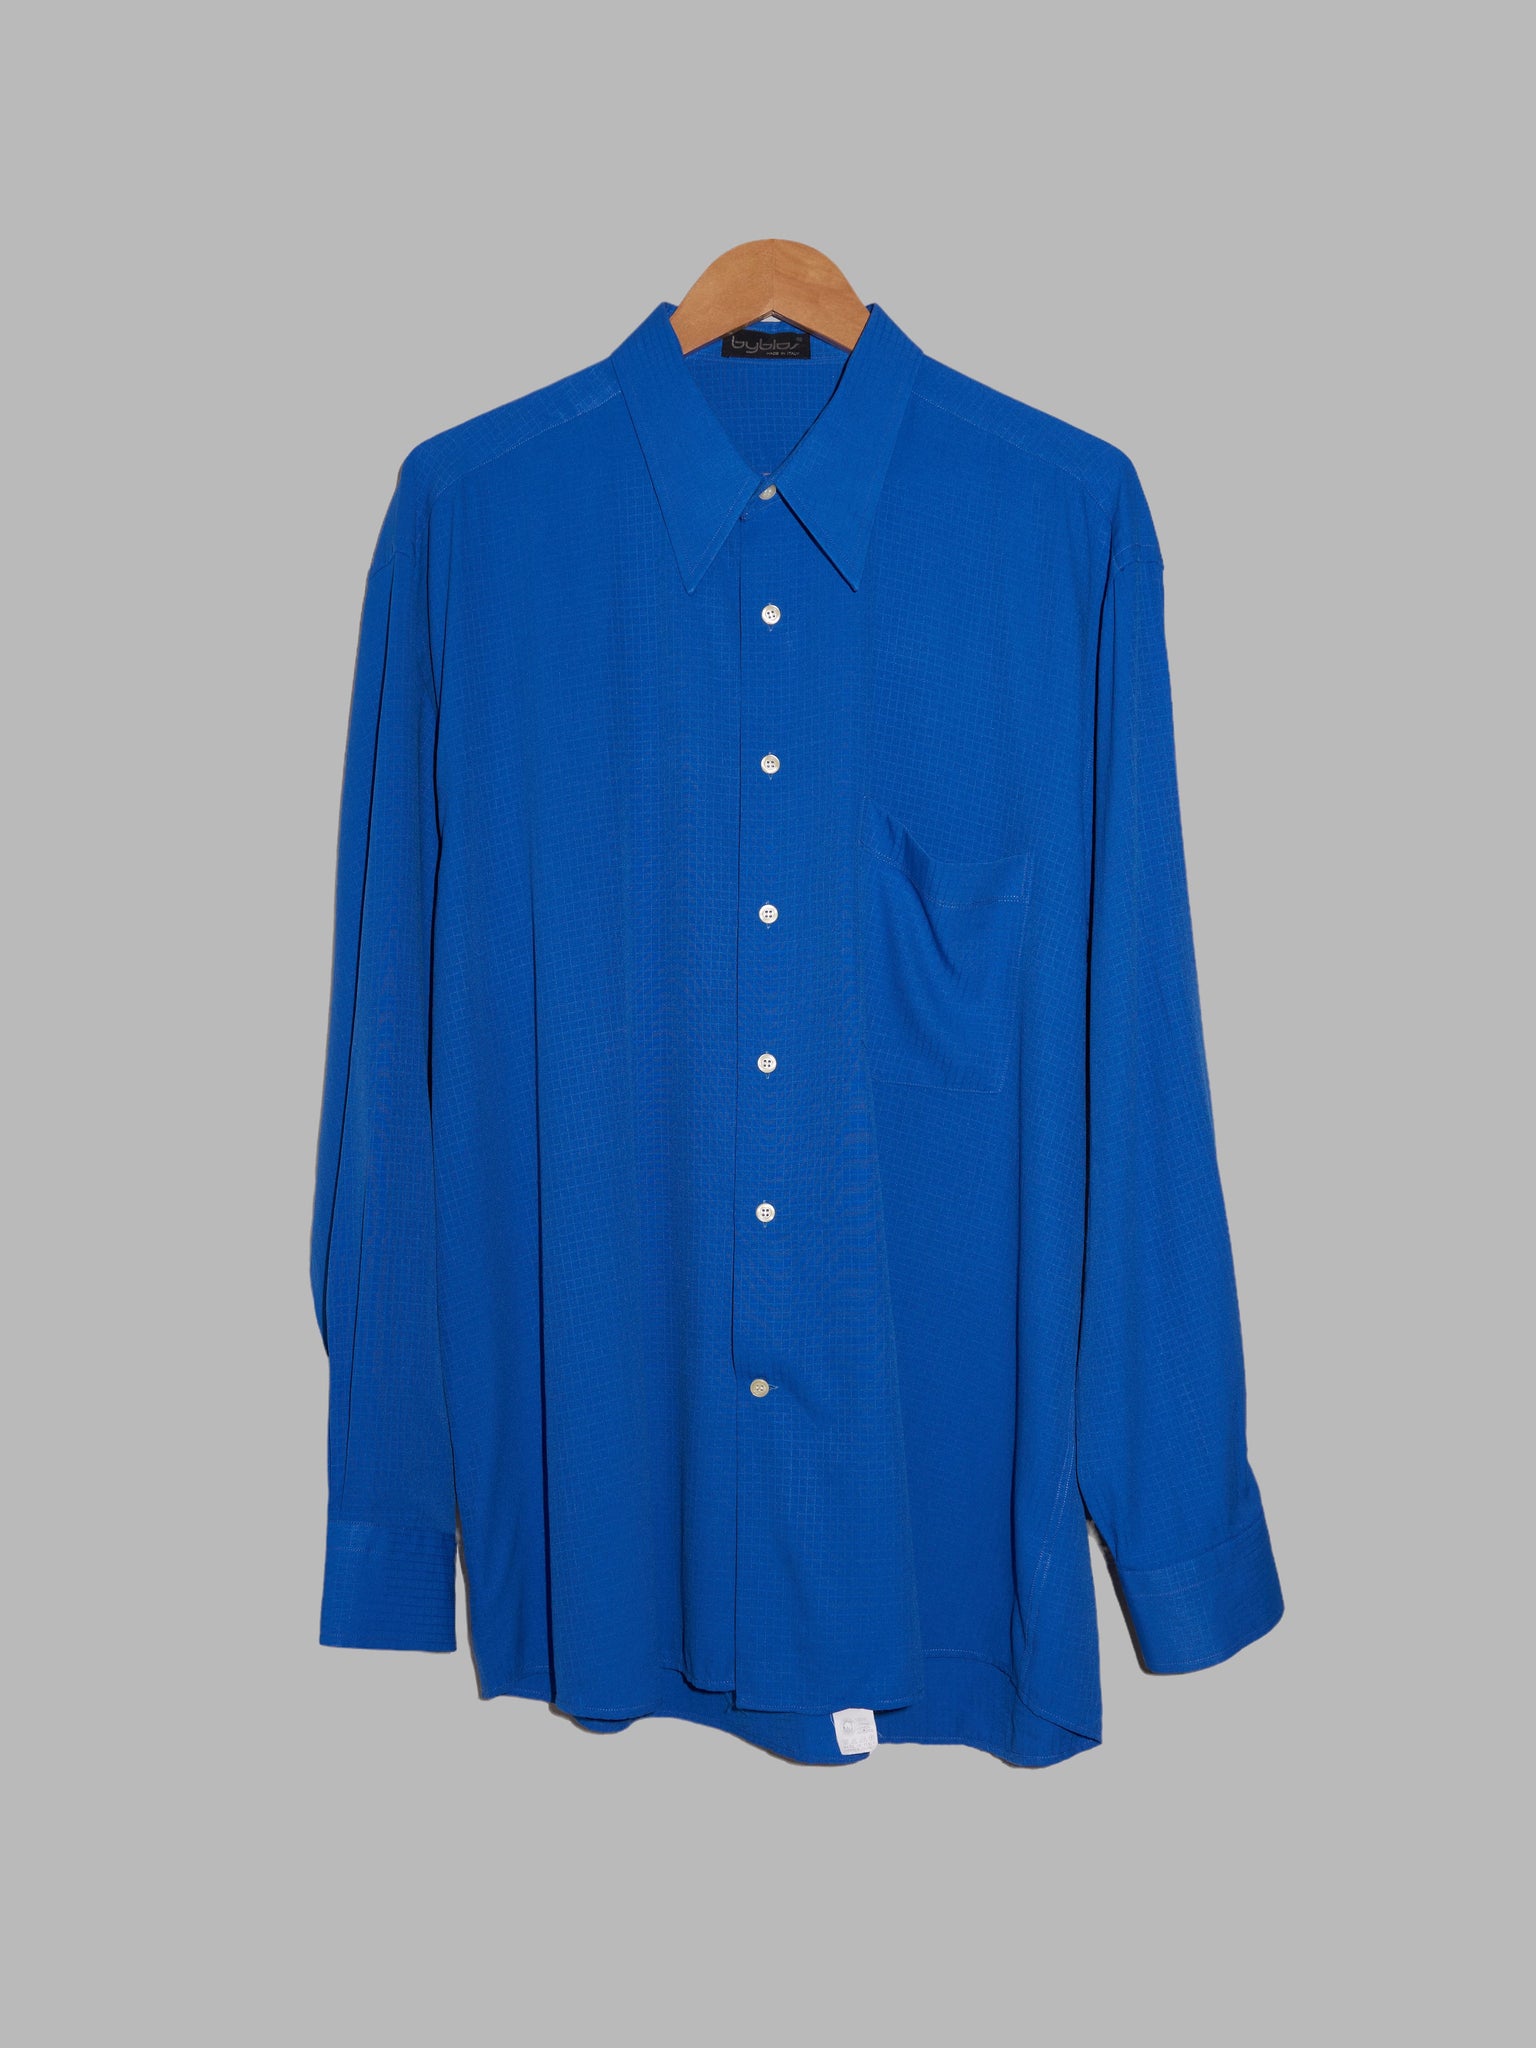 Byblos 1990s blue cotton ripstop long sleeve shirt